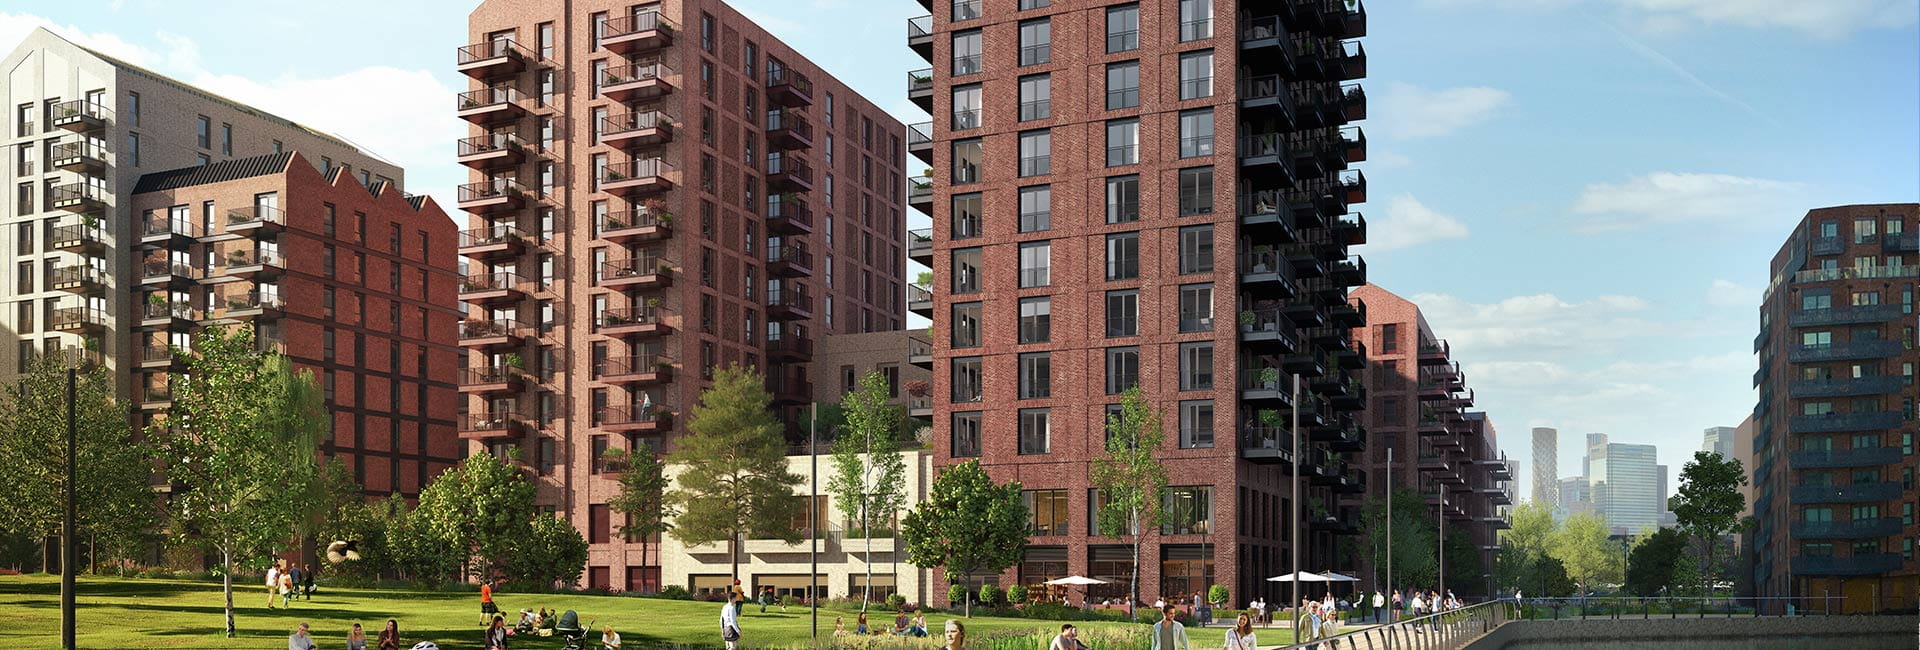 Exterior image of a St William development with residents enjoying the courtyard gardens